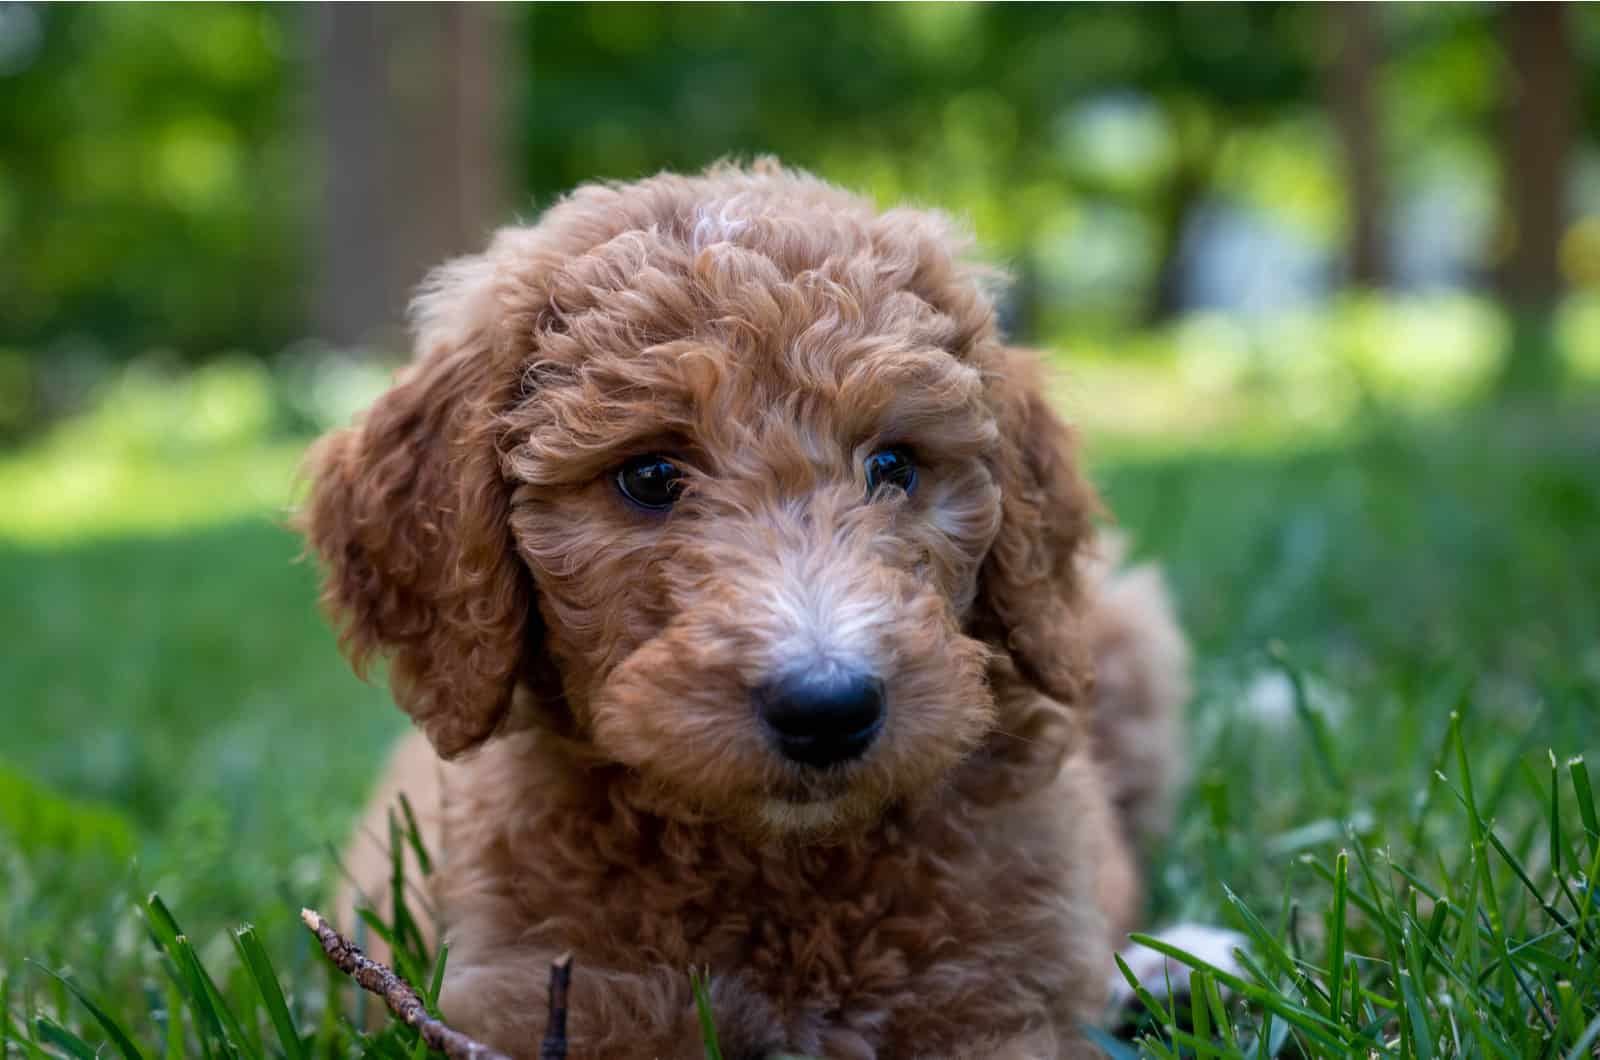 100+ Goldendoodle Names: Find The Cutest One For Your Pup